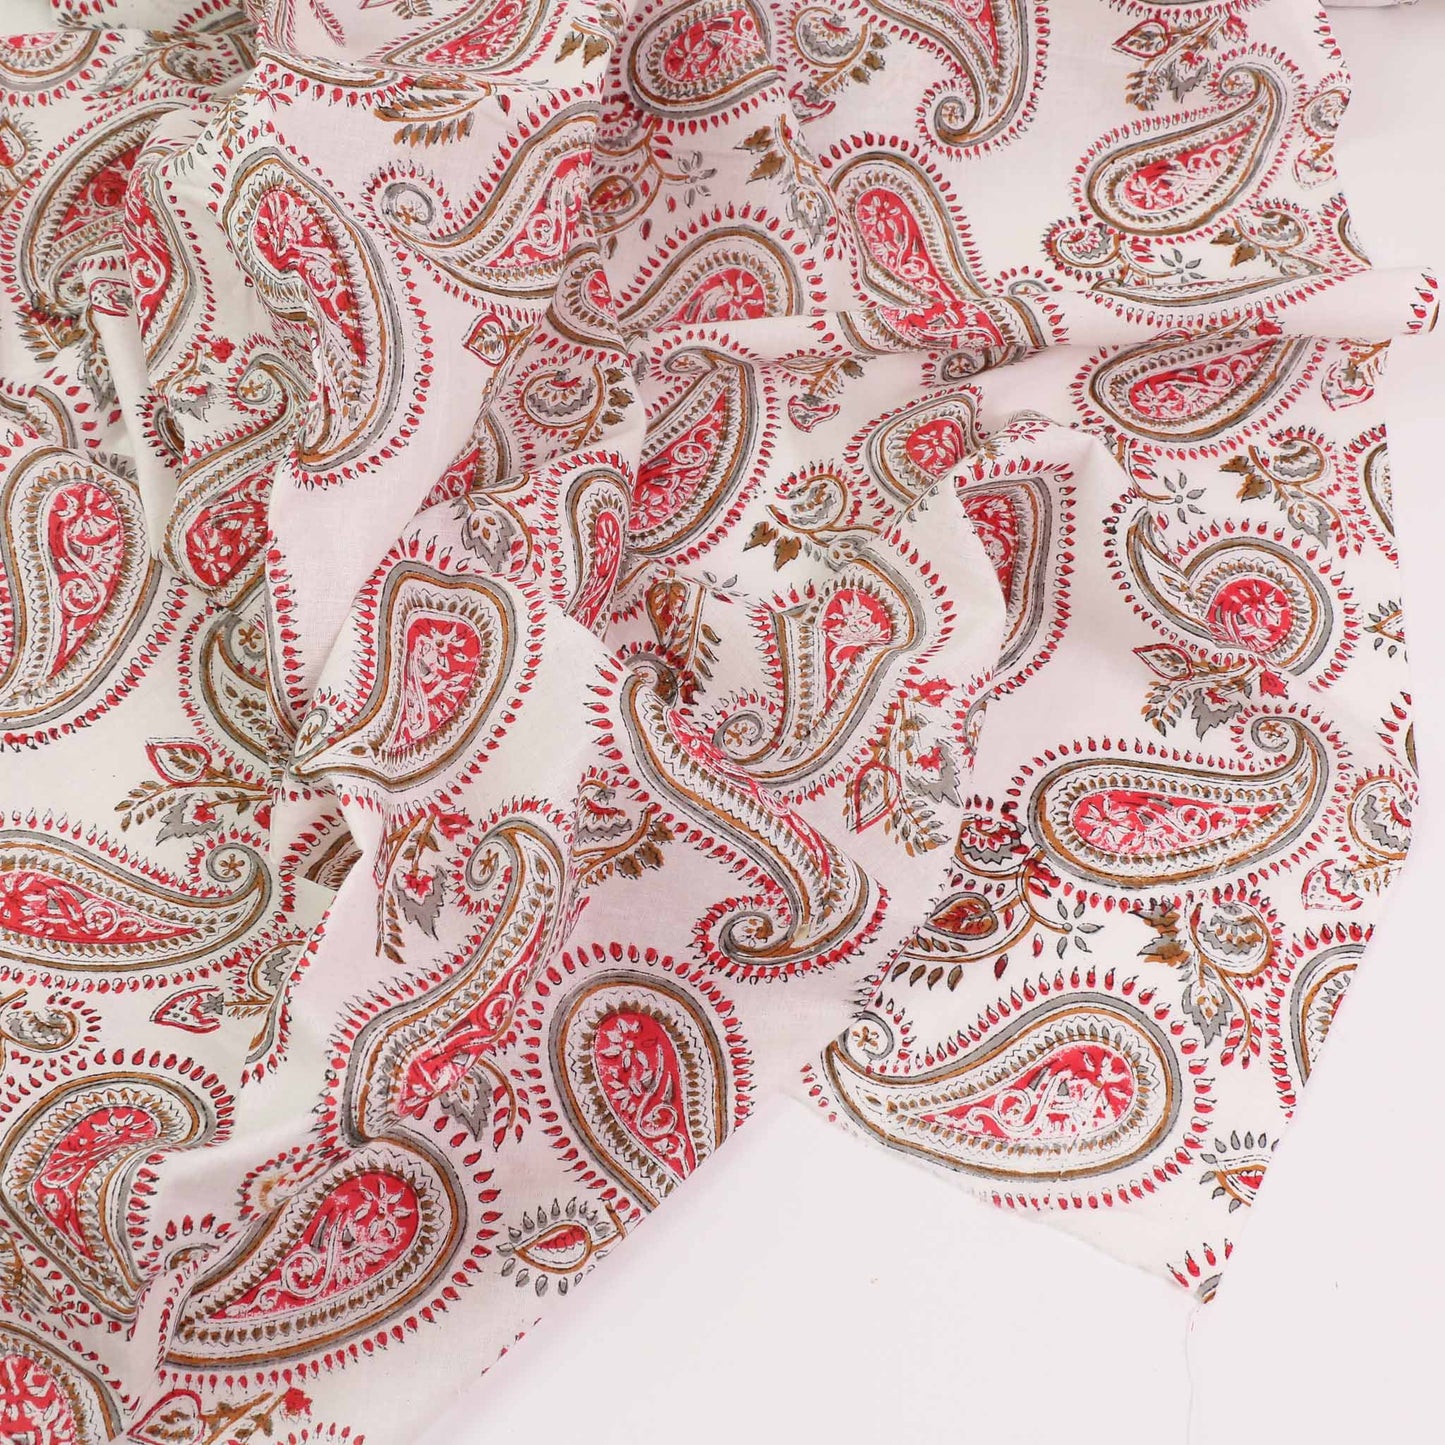 Cotton Voile - Hand block print - White, red